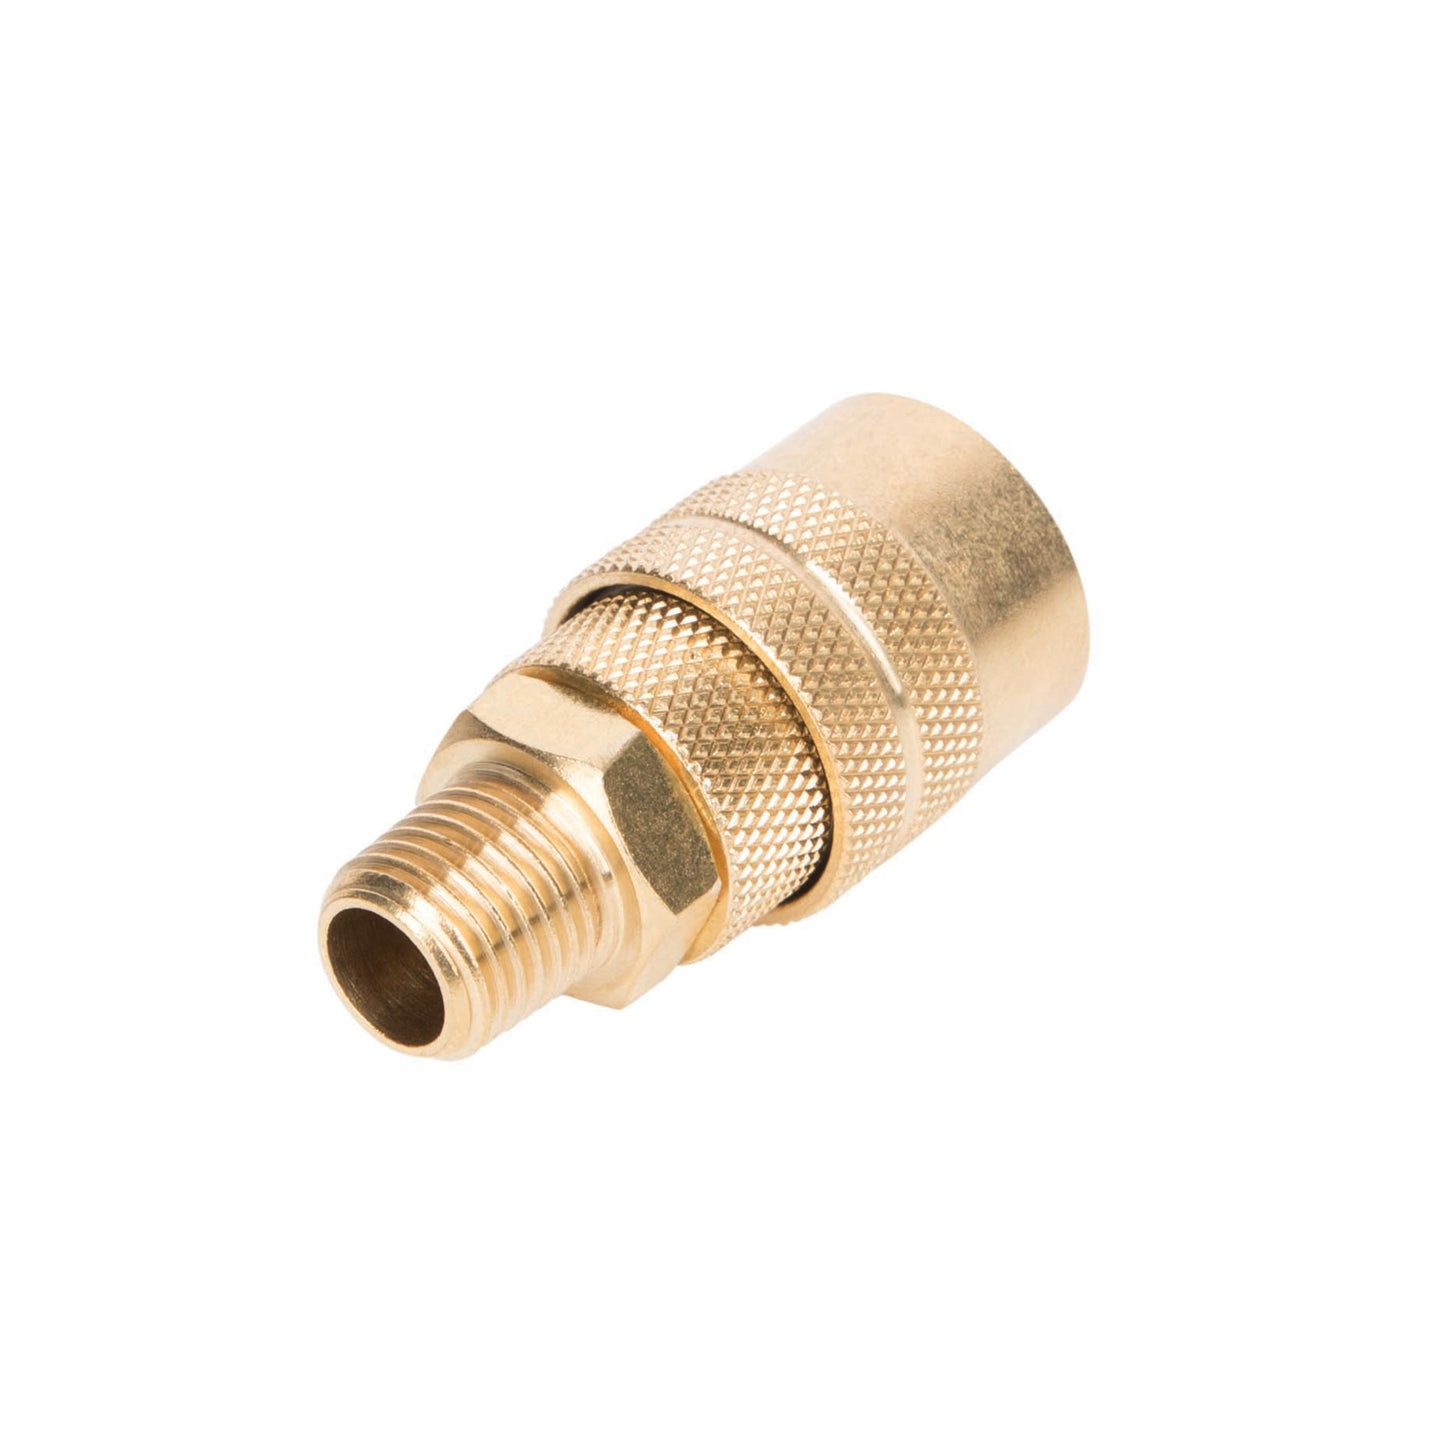 1/4-inch Industrial Brass Coupler with 1/4-Inch Male NPT Threads, 10-Pack